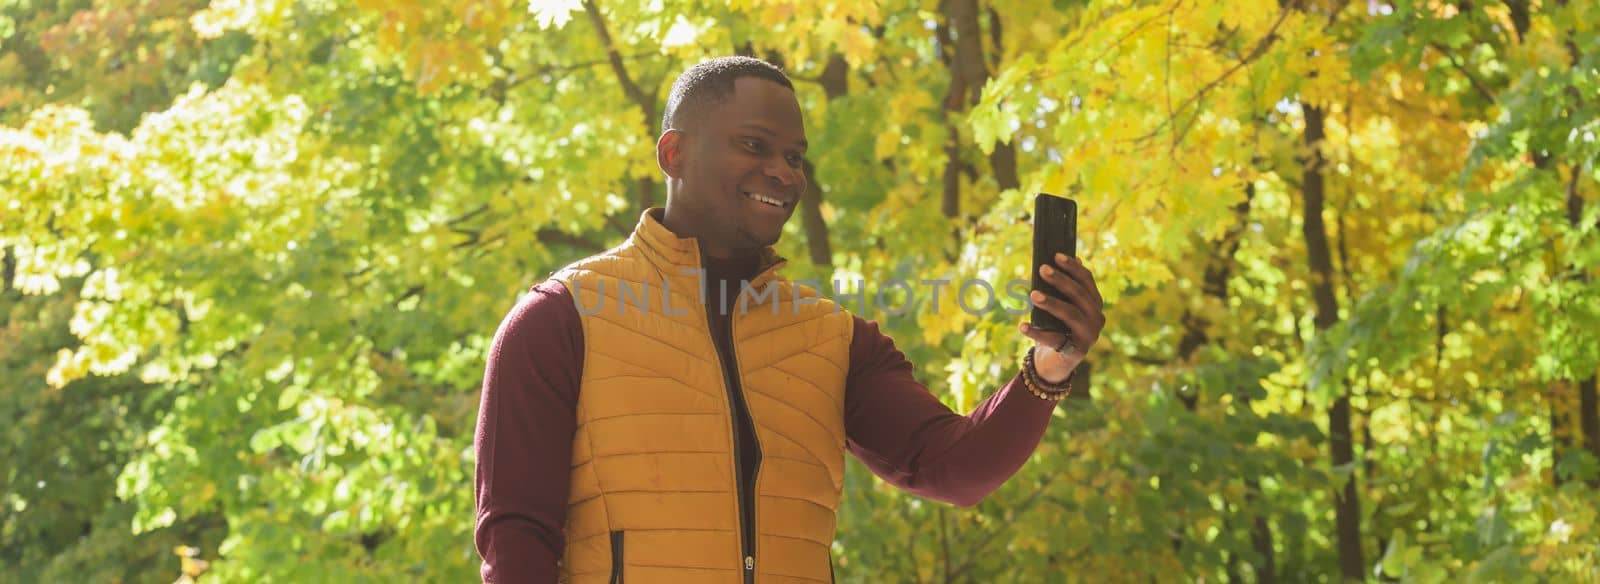 African American man taking a self portrait with a smartphone in autumn fall park. Happy people, season and new normality